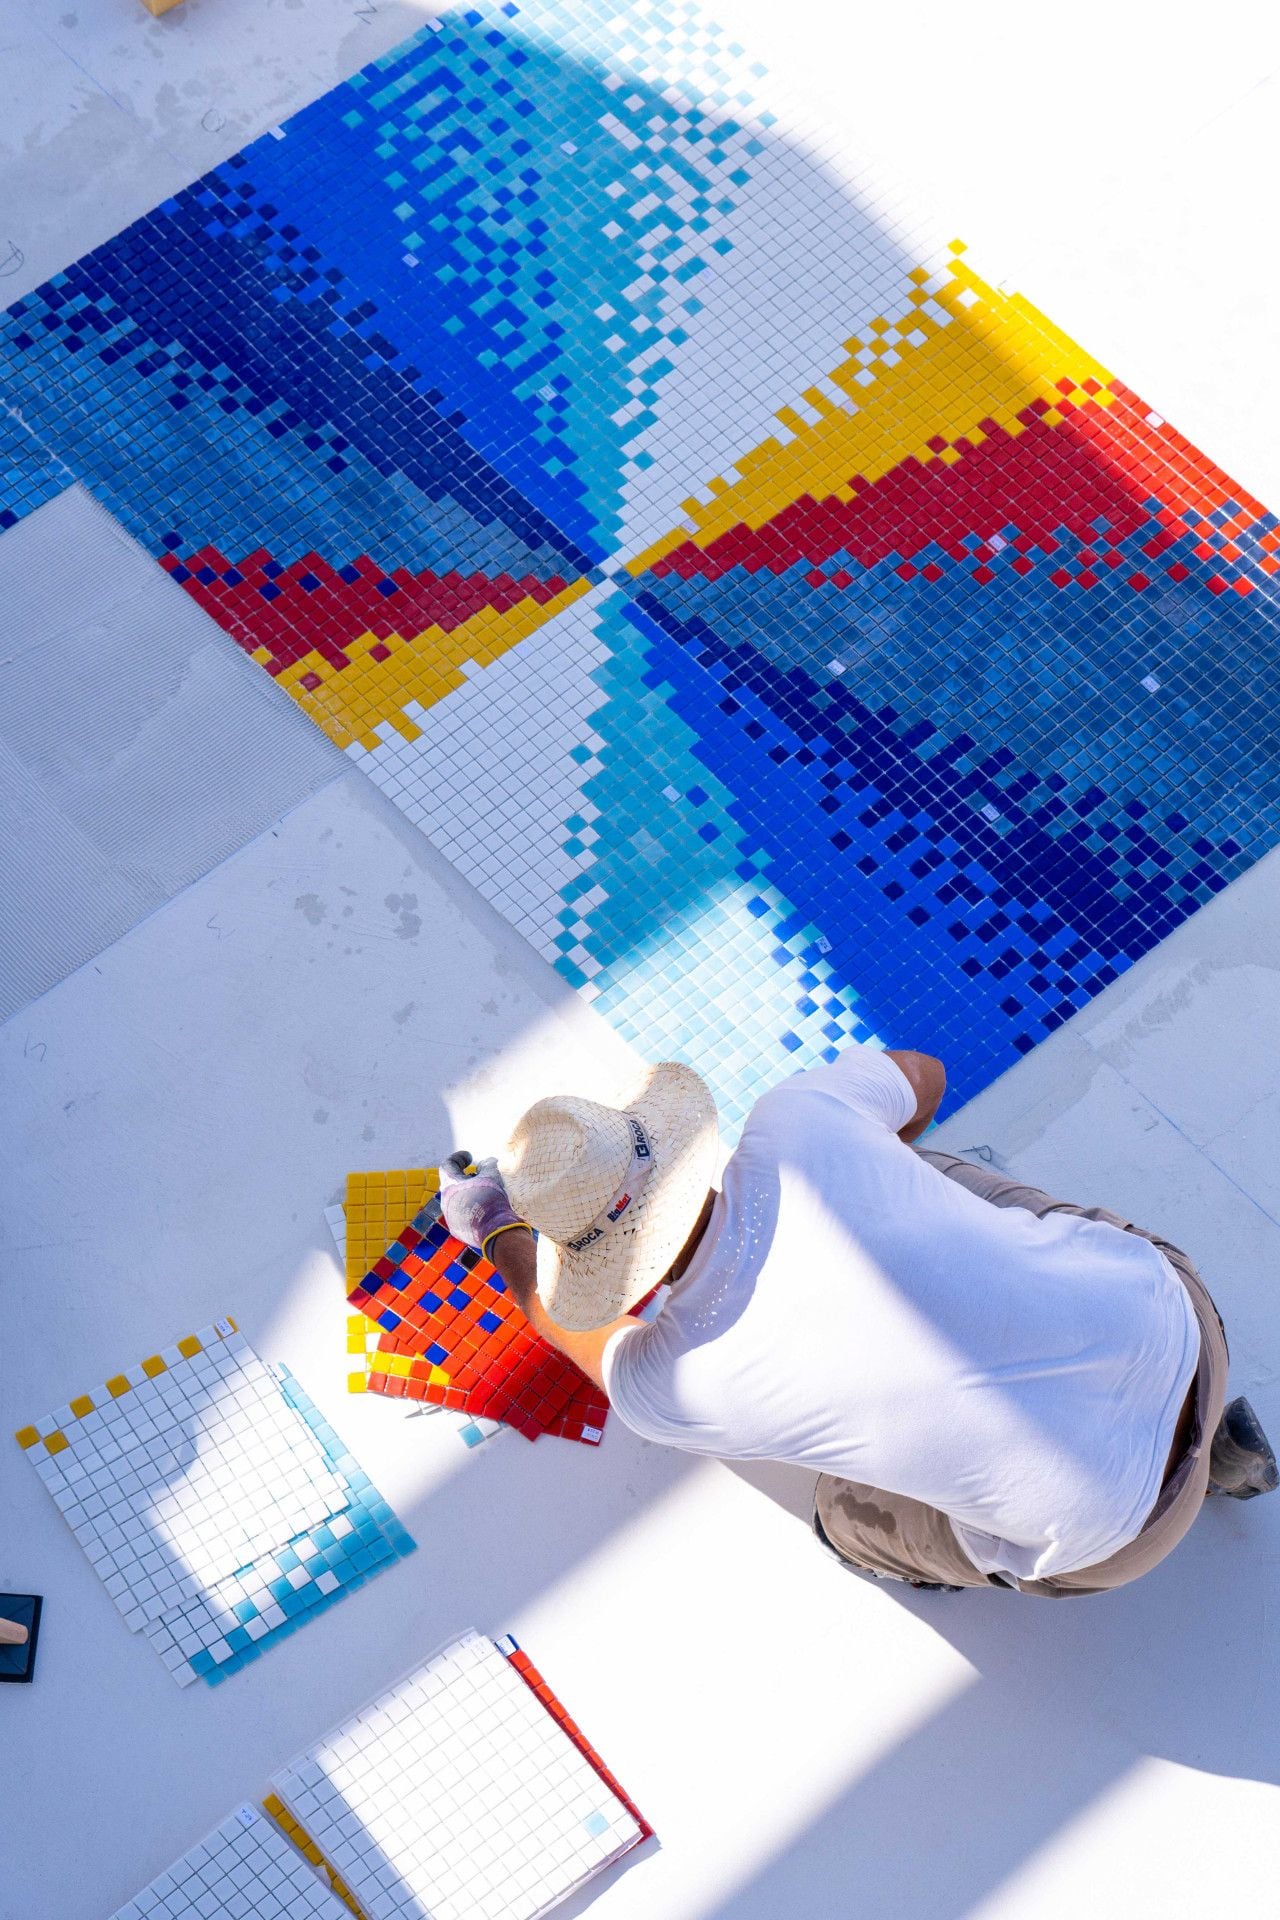 Felipe Pantone at work laying the colorful tiles on the floor of the swimming pool.